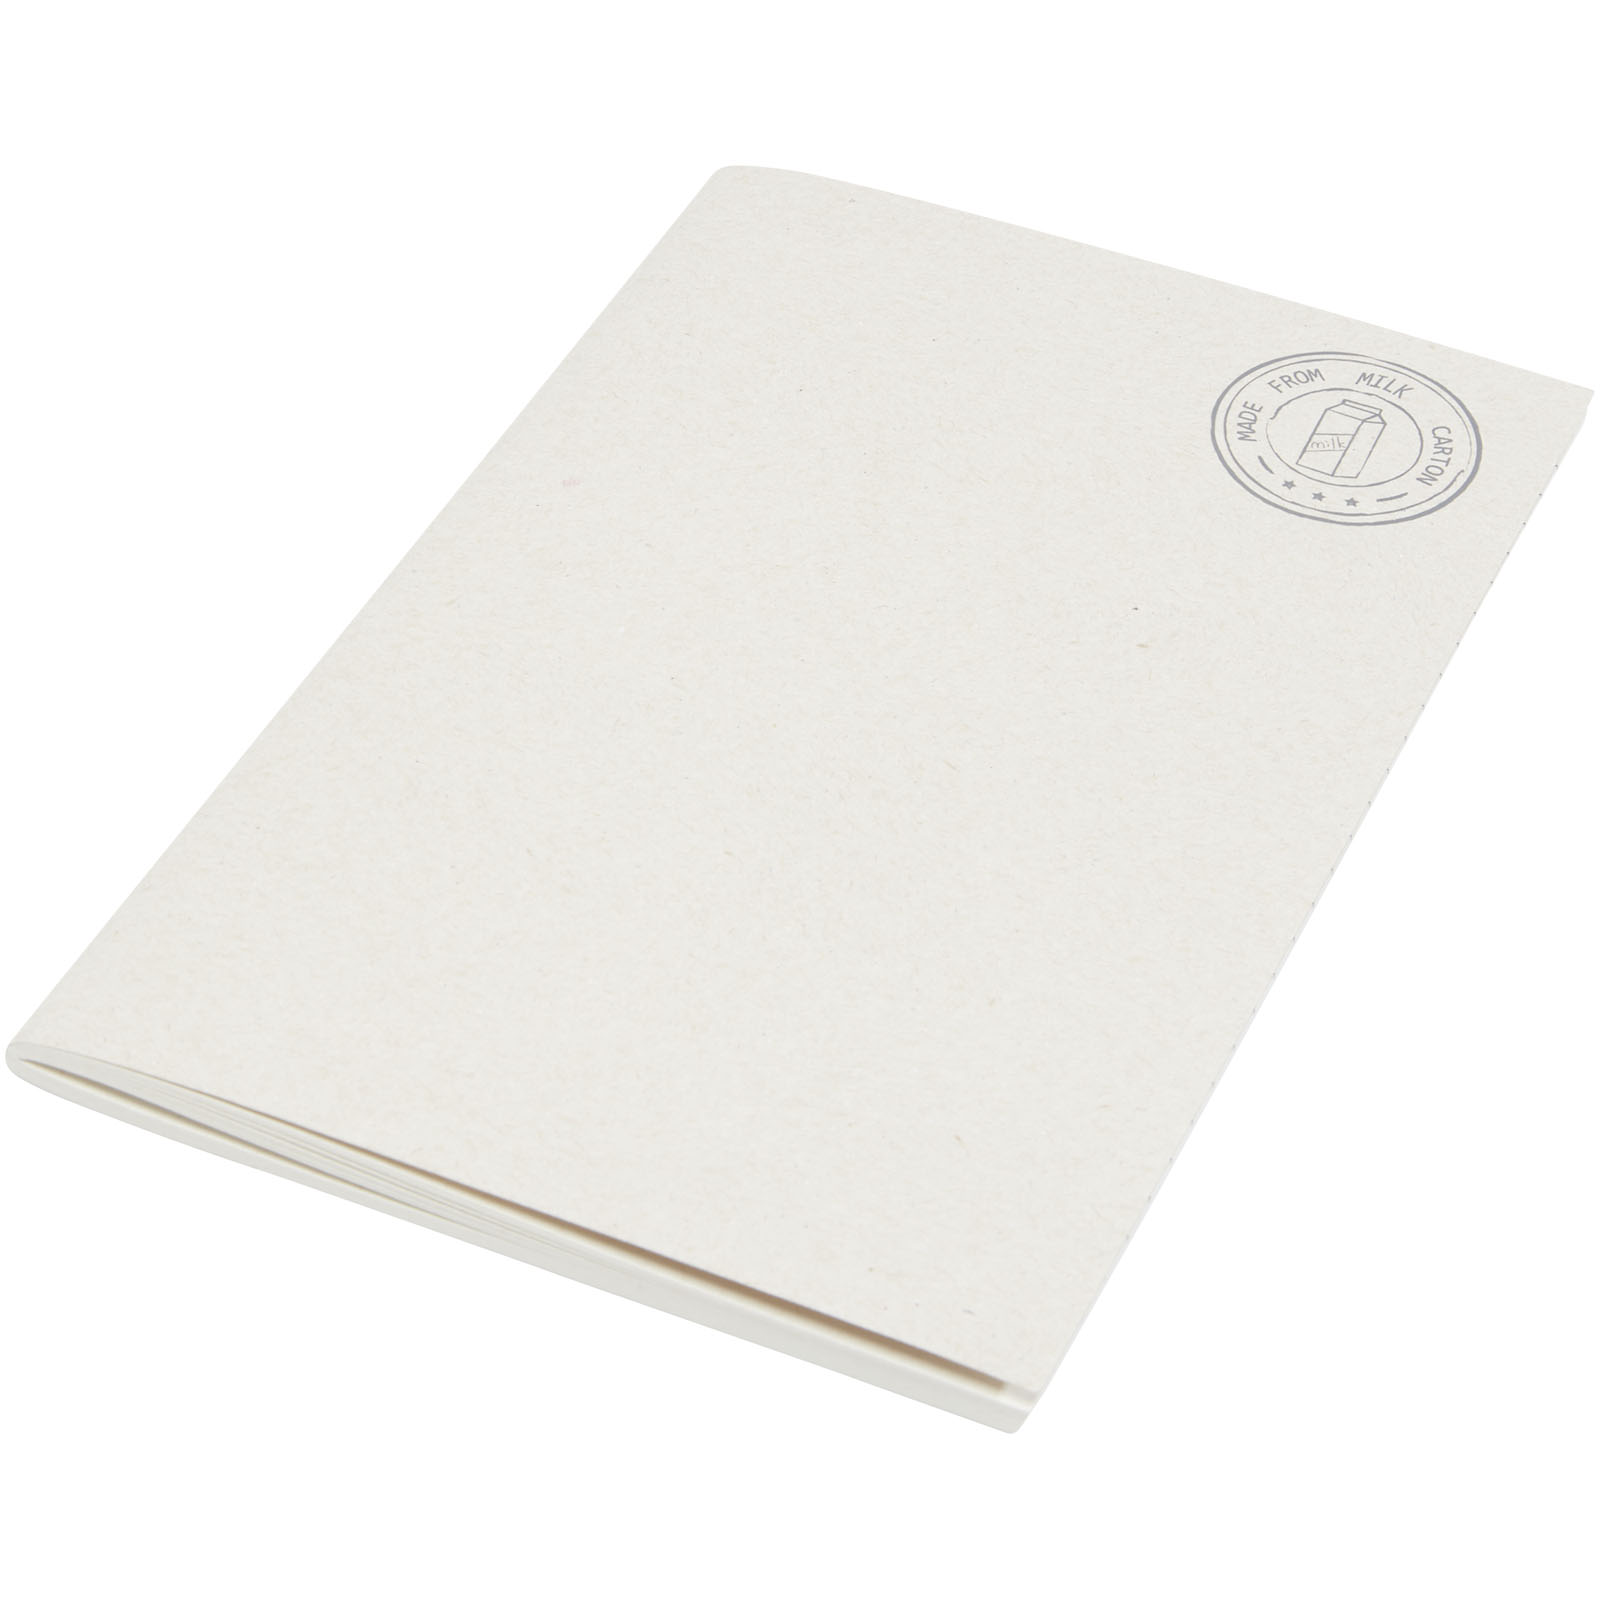 Lined notebook MOOZE made of recycled milk cartons, format A5 - off white